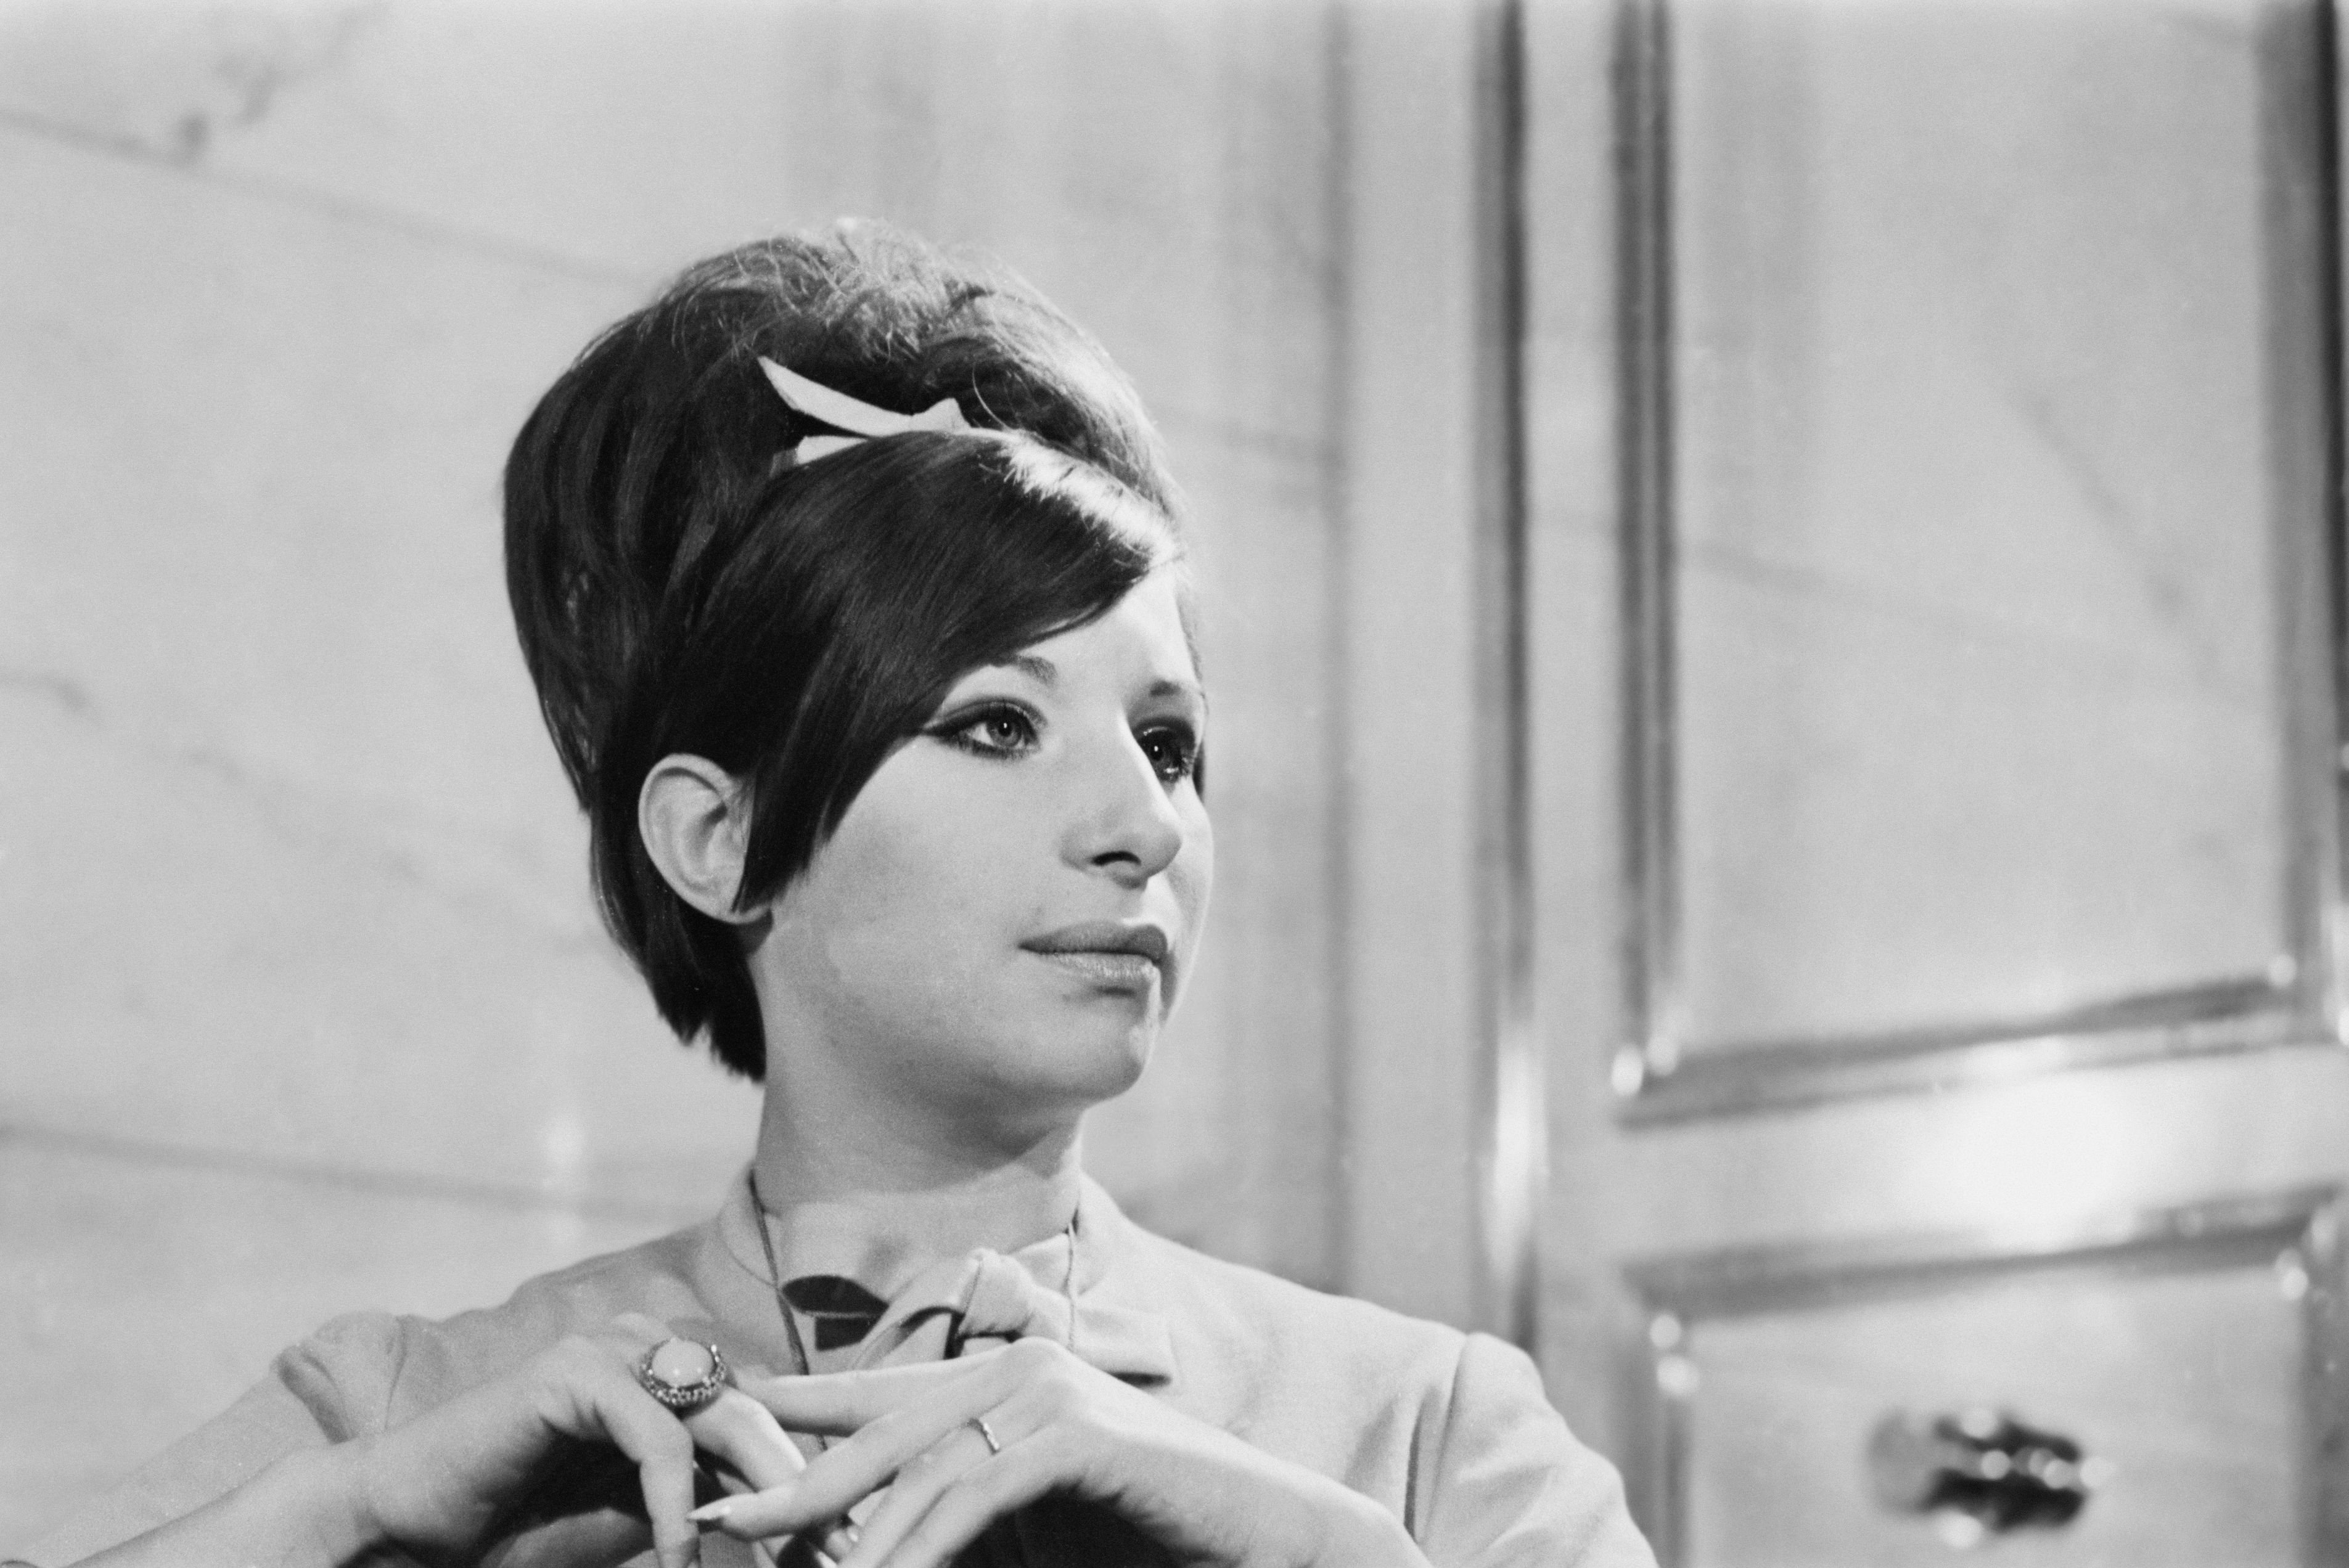 American singer and actress Barbra Streisand circa 1966 | Source: Getty Images